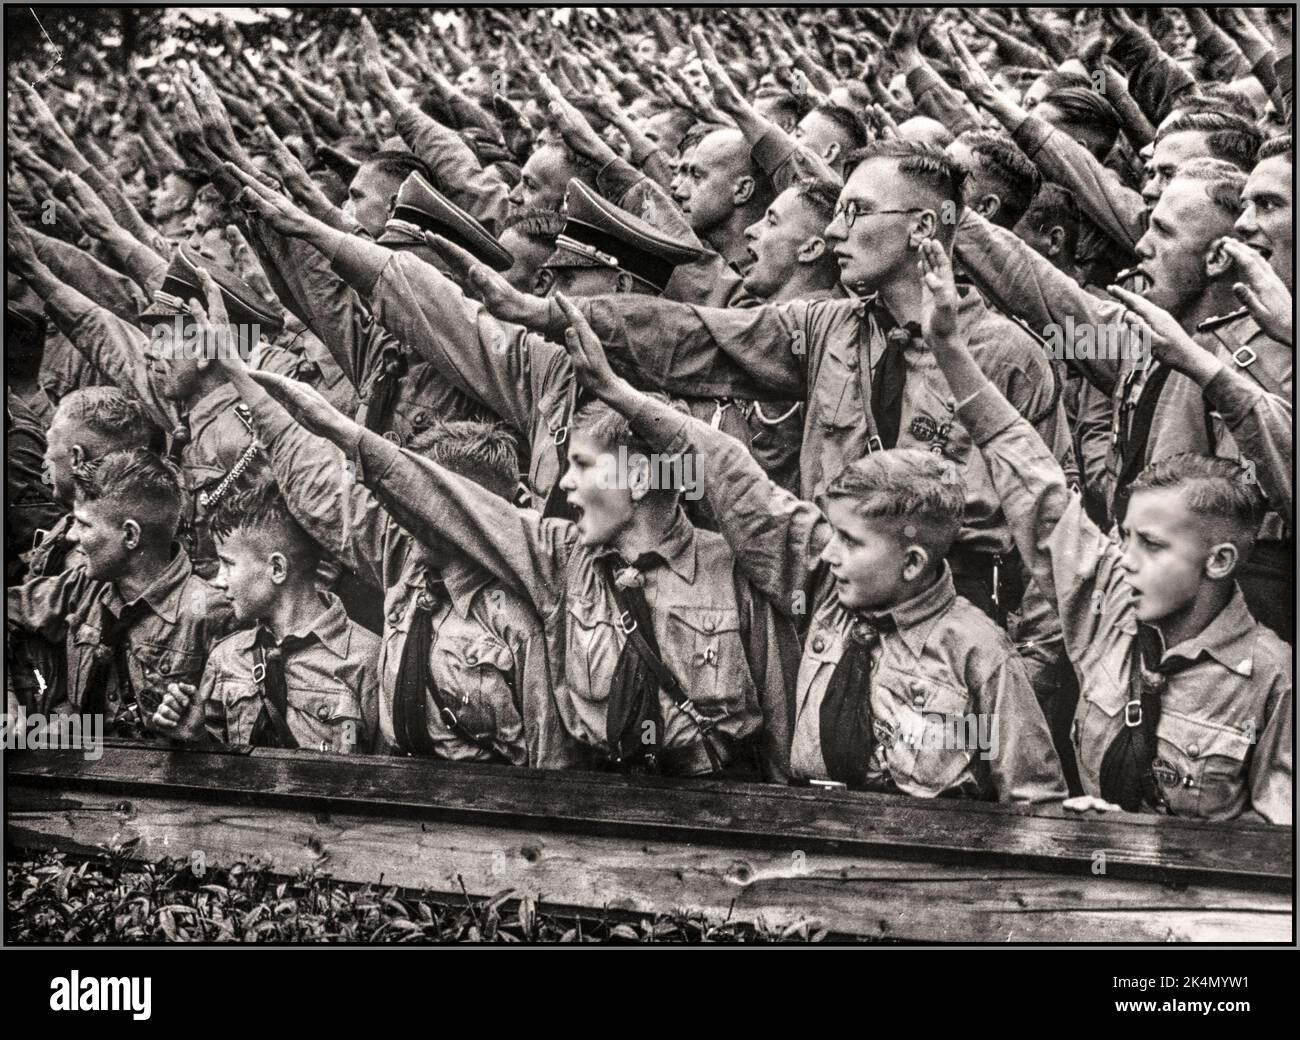 Hitler Youth Hitlerjugend. Nazi indoctrination with boys and youths passionately giving Heil Hitler salutes at a Nazi Nuremberg Rally Nazi Germany 1937 Stock Photo